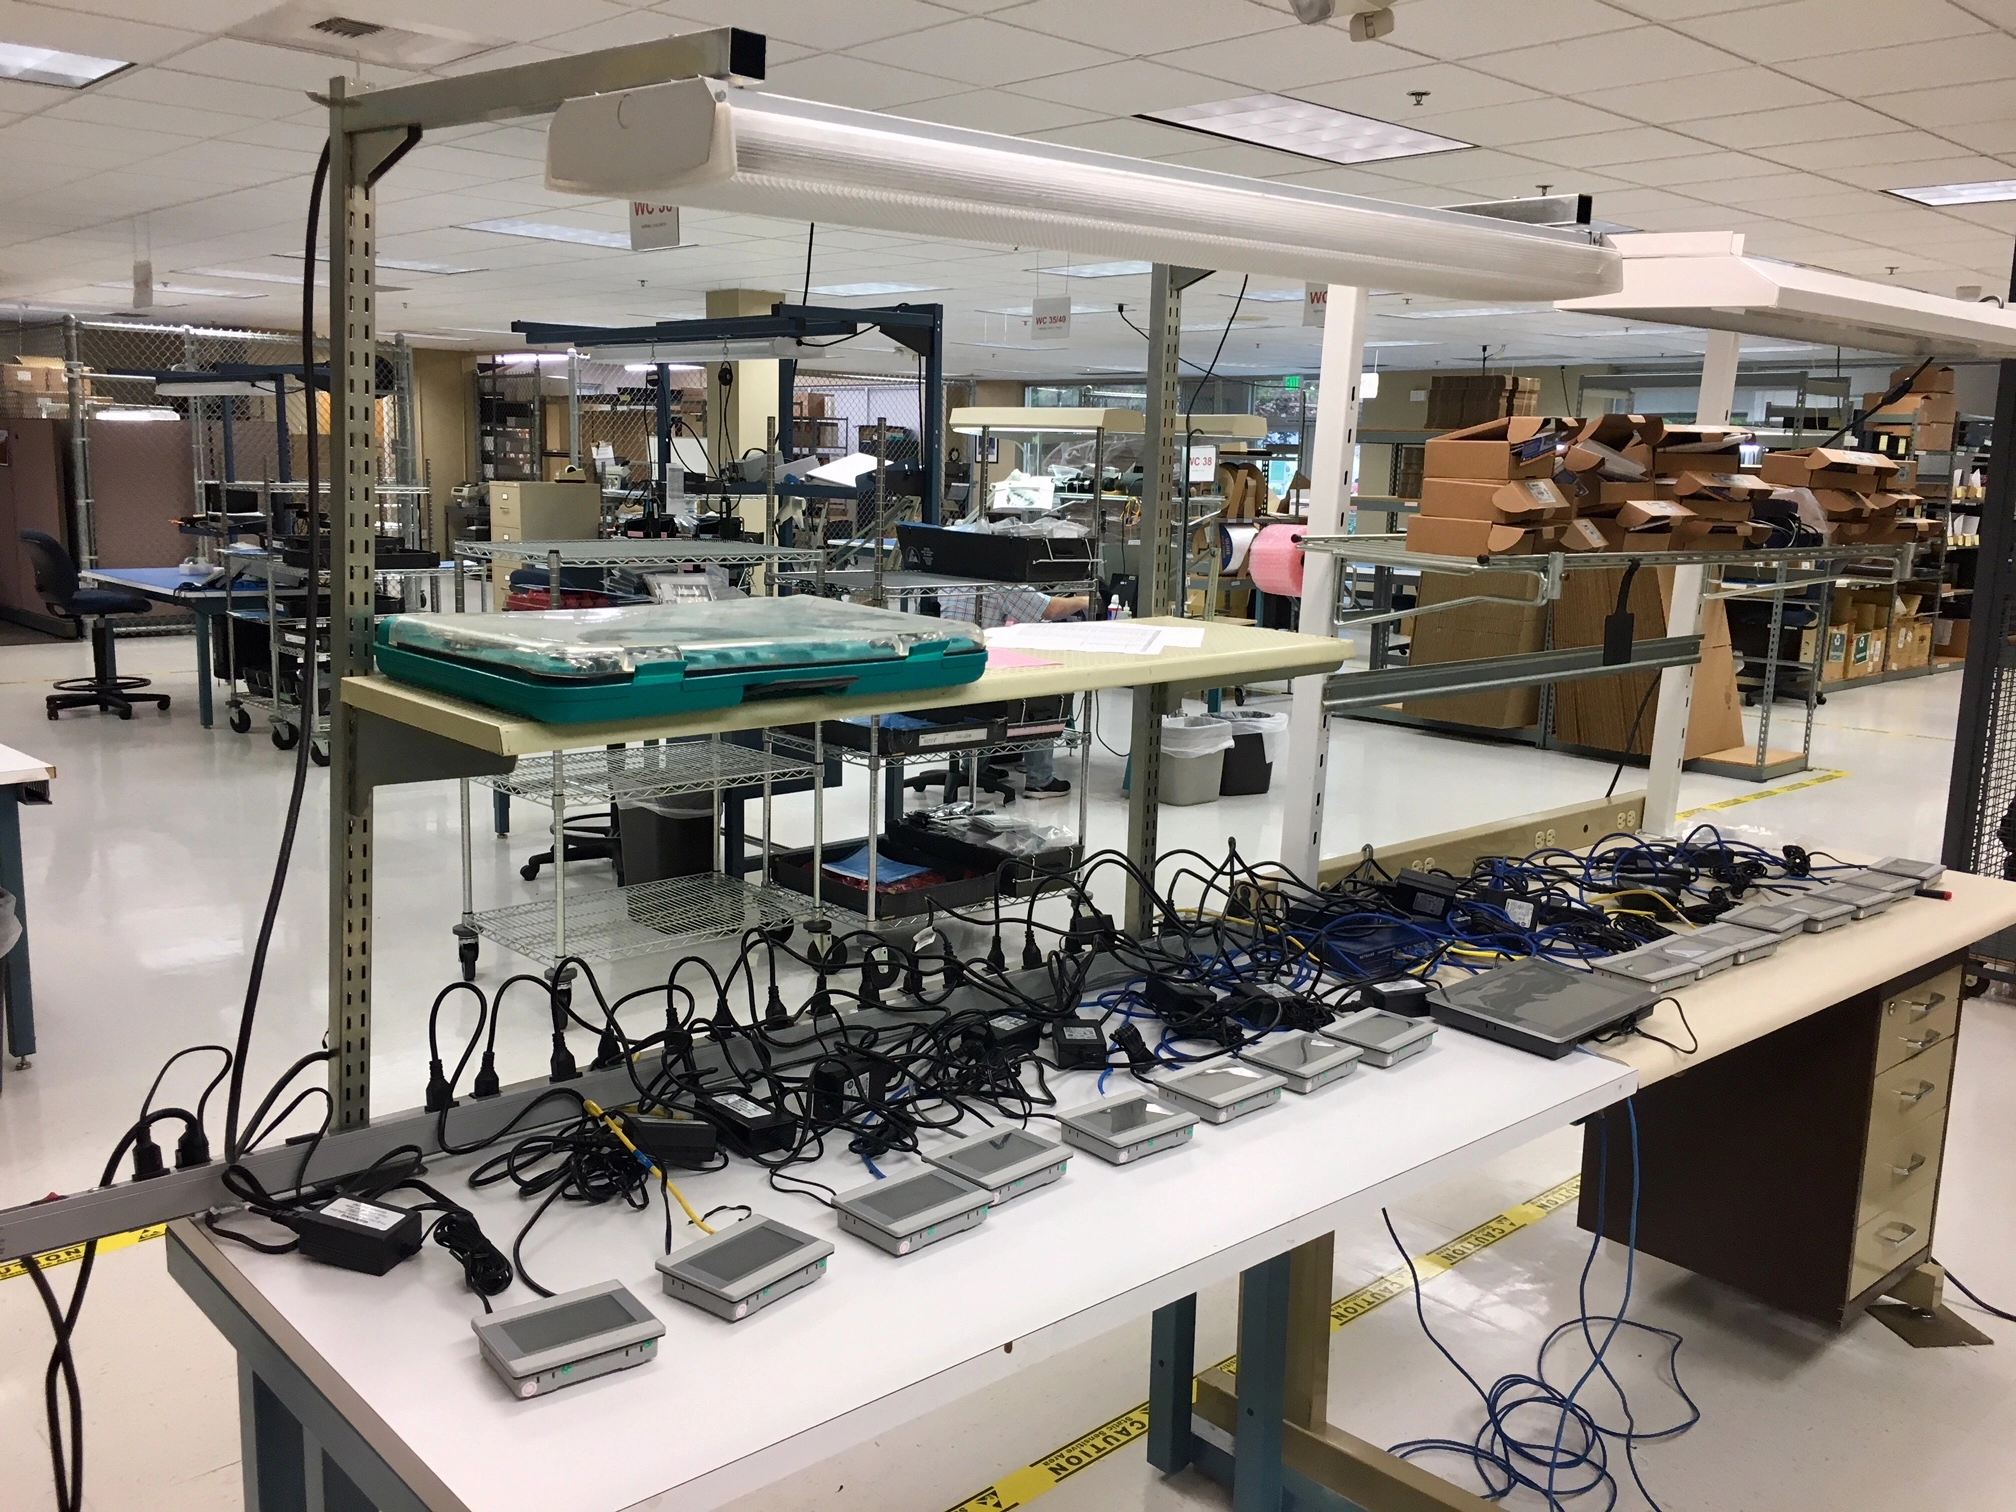 To facilitate the testing and prove out the solution, we set-up a test lab of 16 4.3” HMIs and 1 15” HMI at our facility.